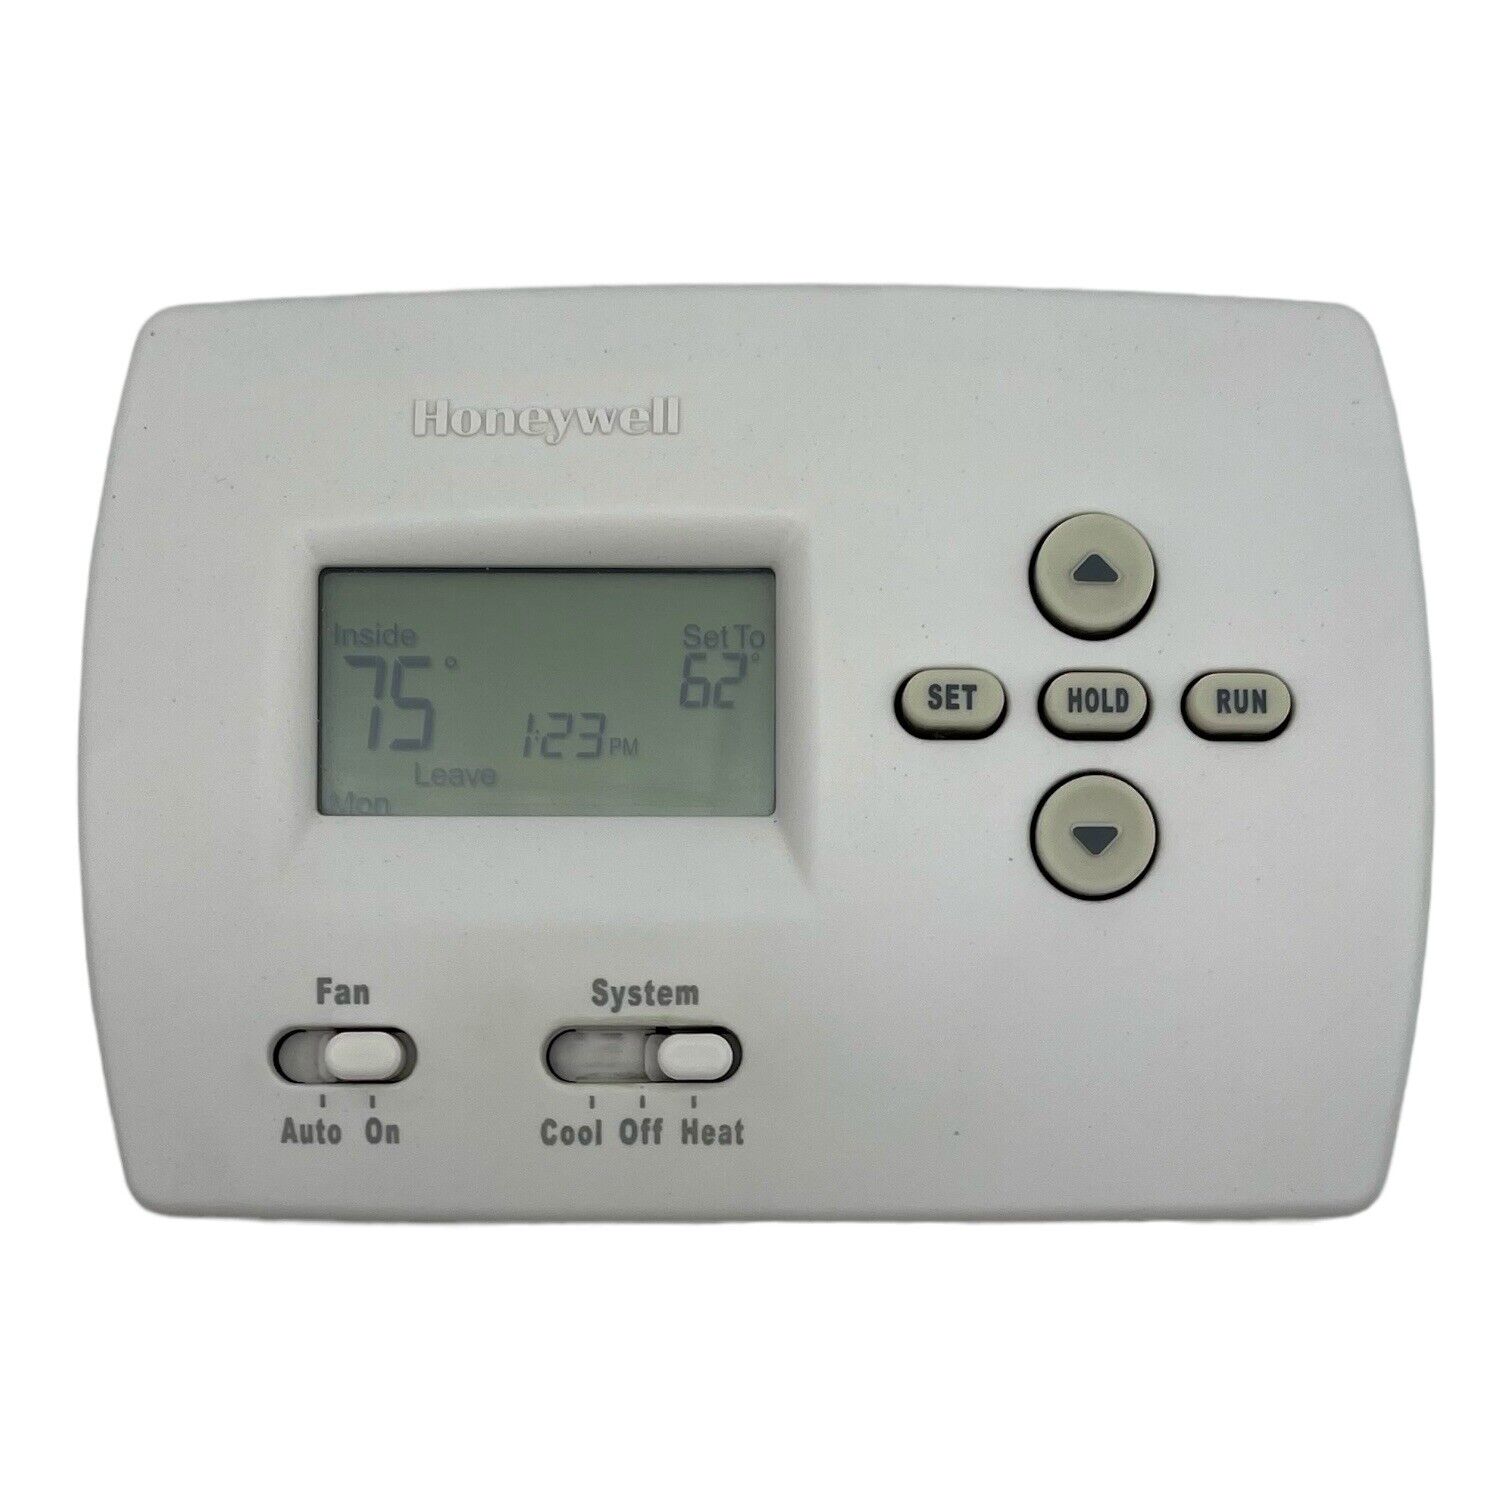 Honeywell PRO 4000 5-2 Day Programmable Heat / Cool Thermostat TH4110D1007